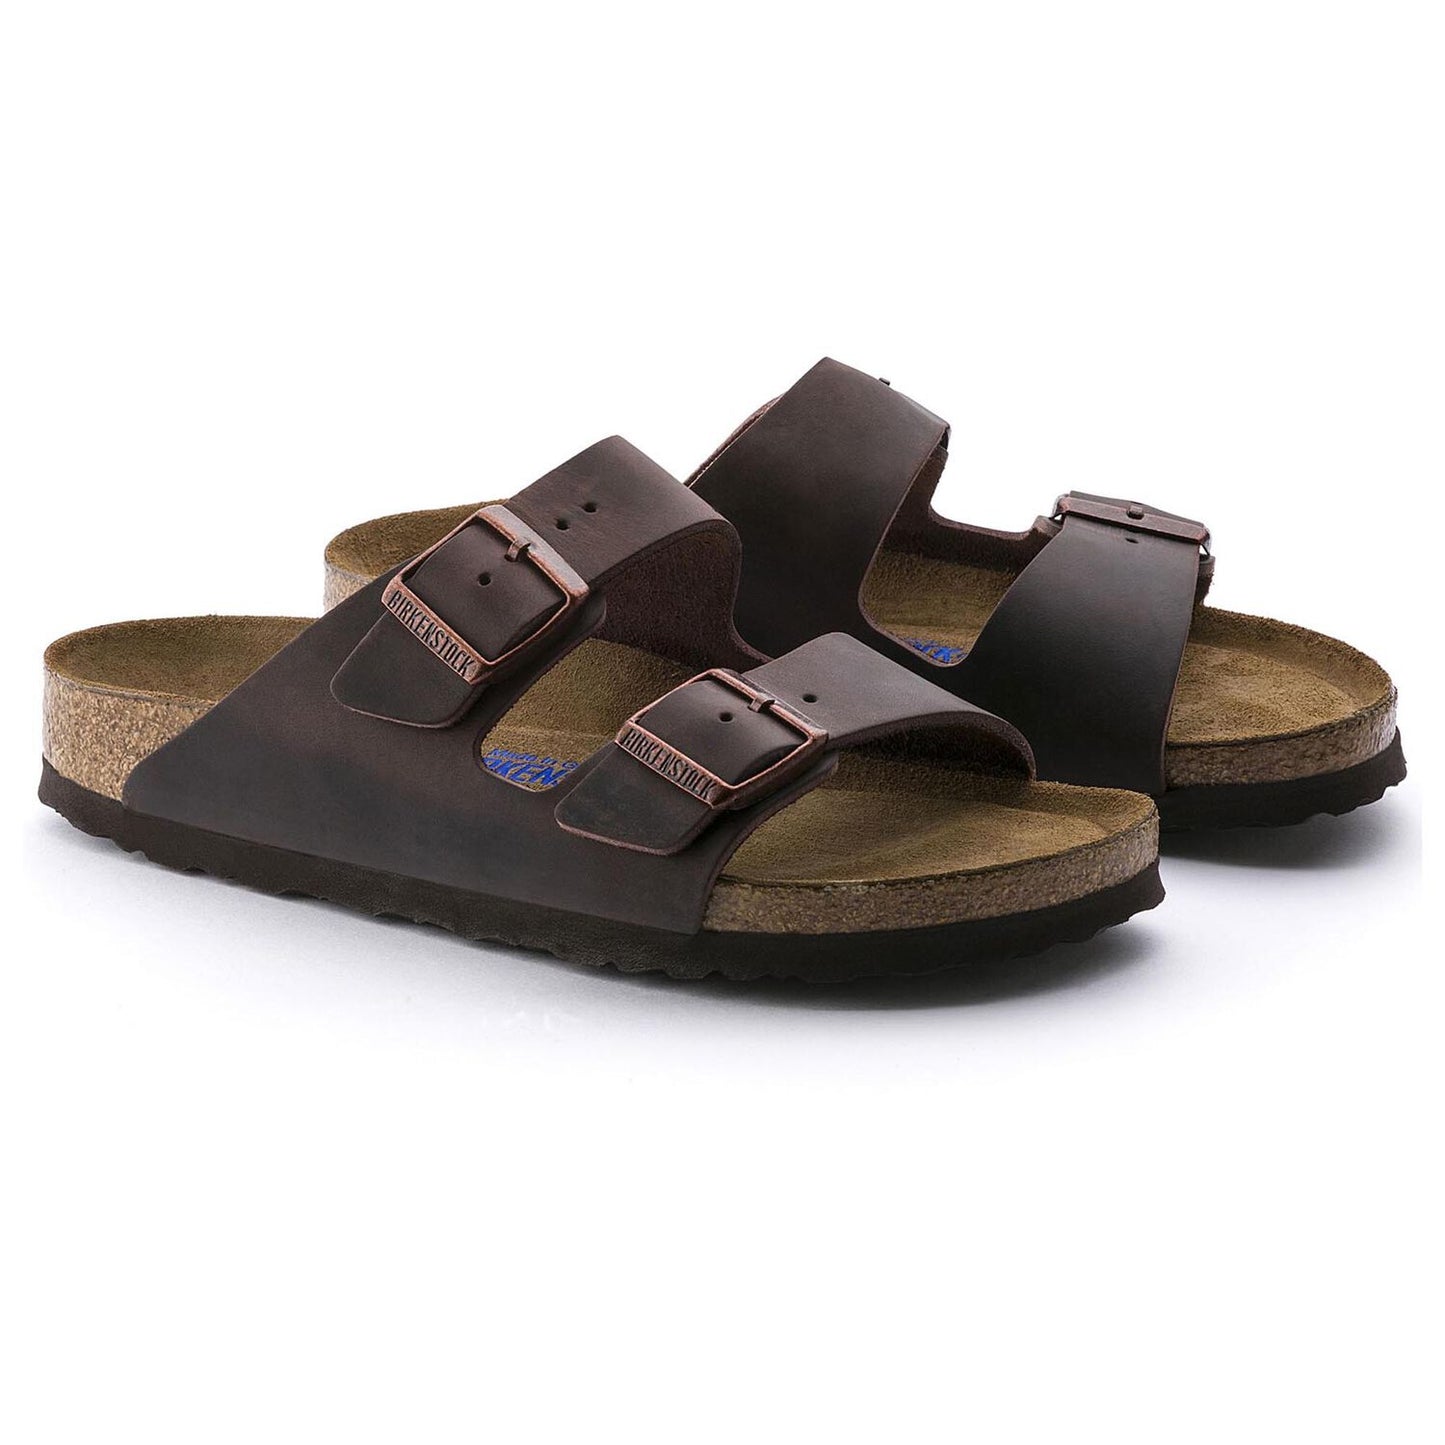 Unisex Arizona Soft Footbed Oiled Leather by Birkenstock